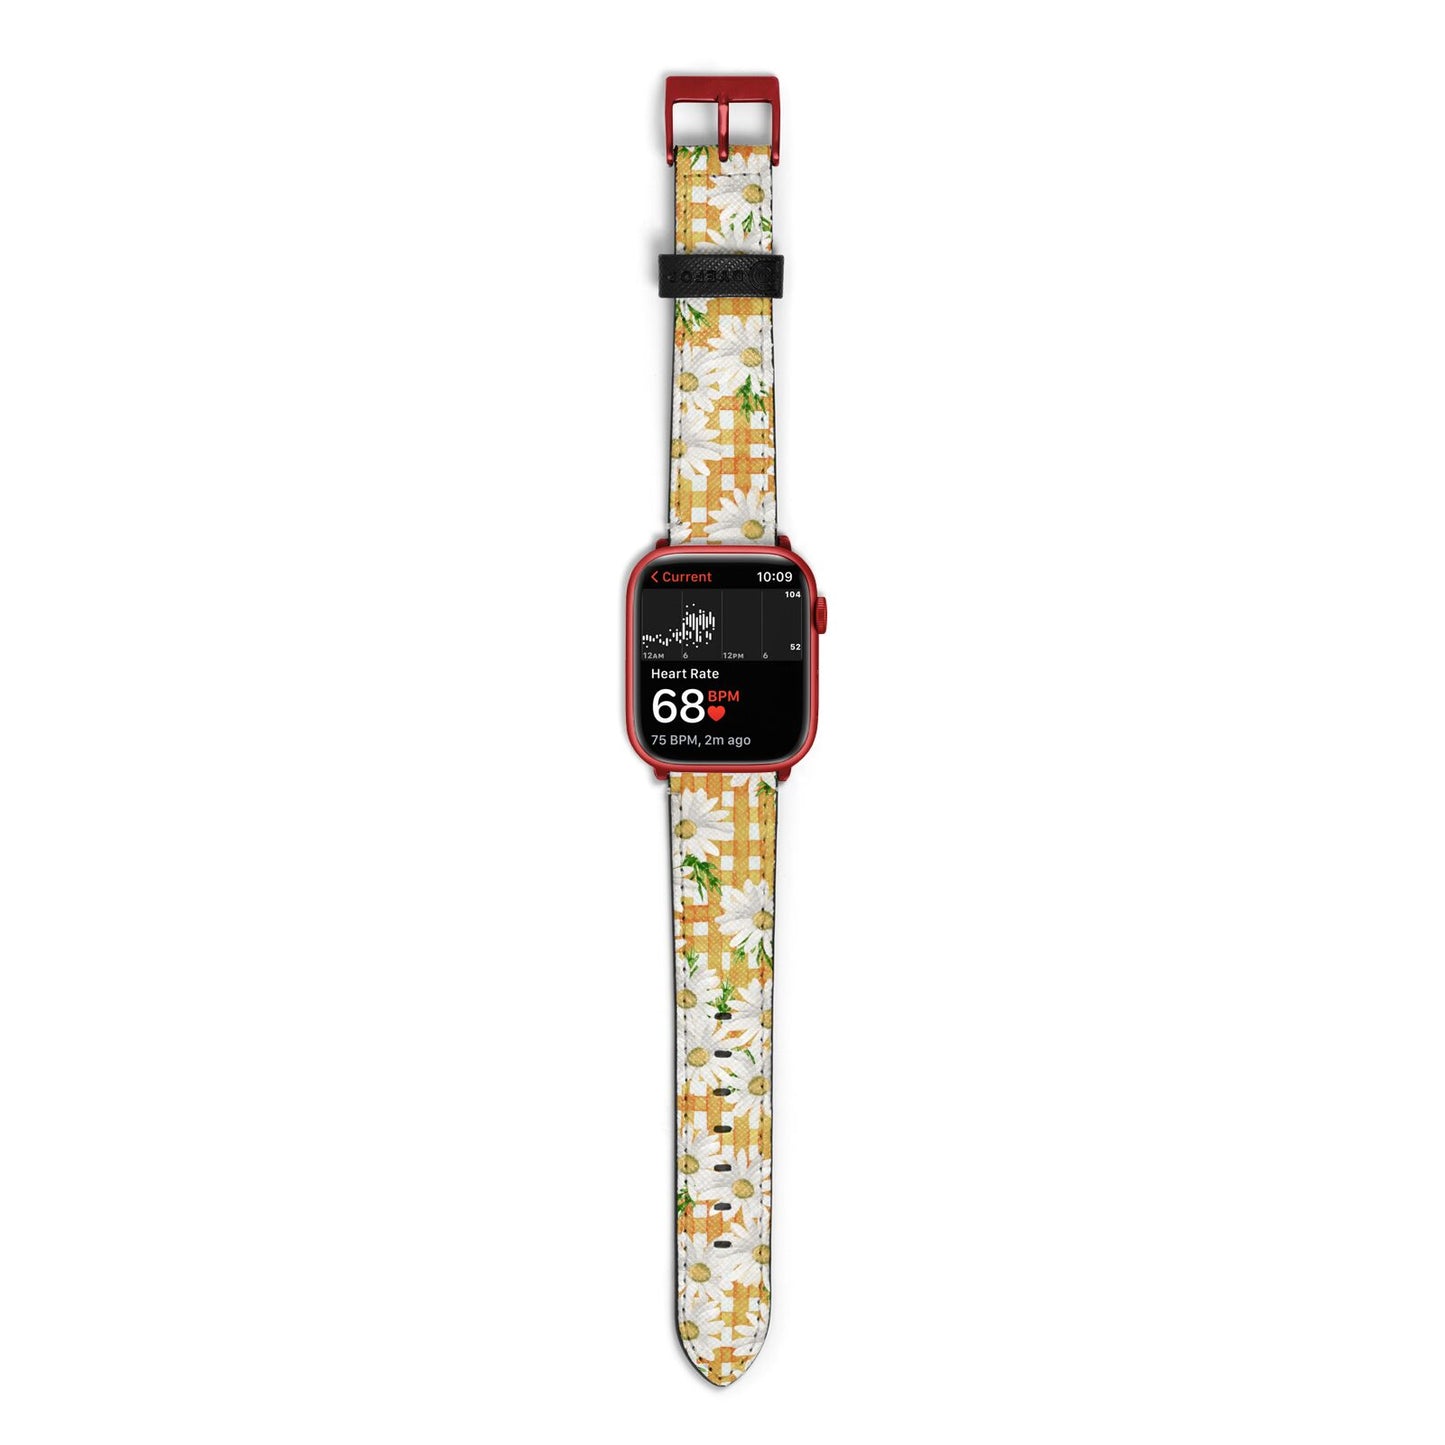 Checkered Daisy Apple Watch Strap Size 38mm with Red Hardware